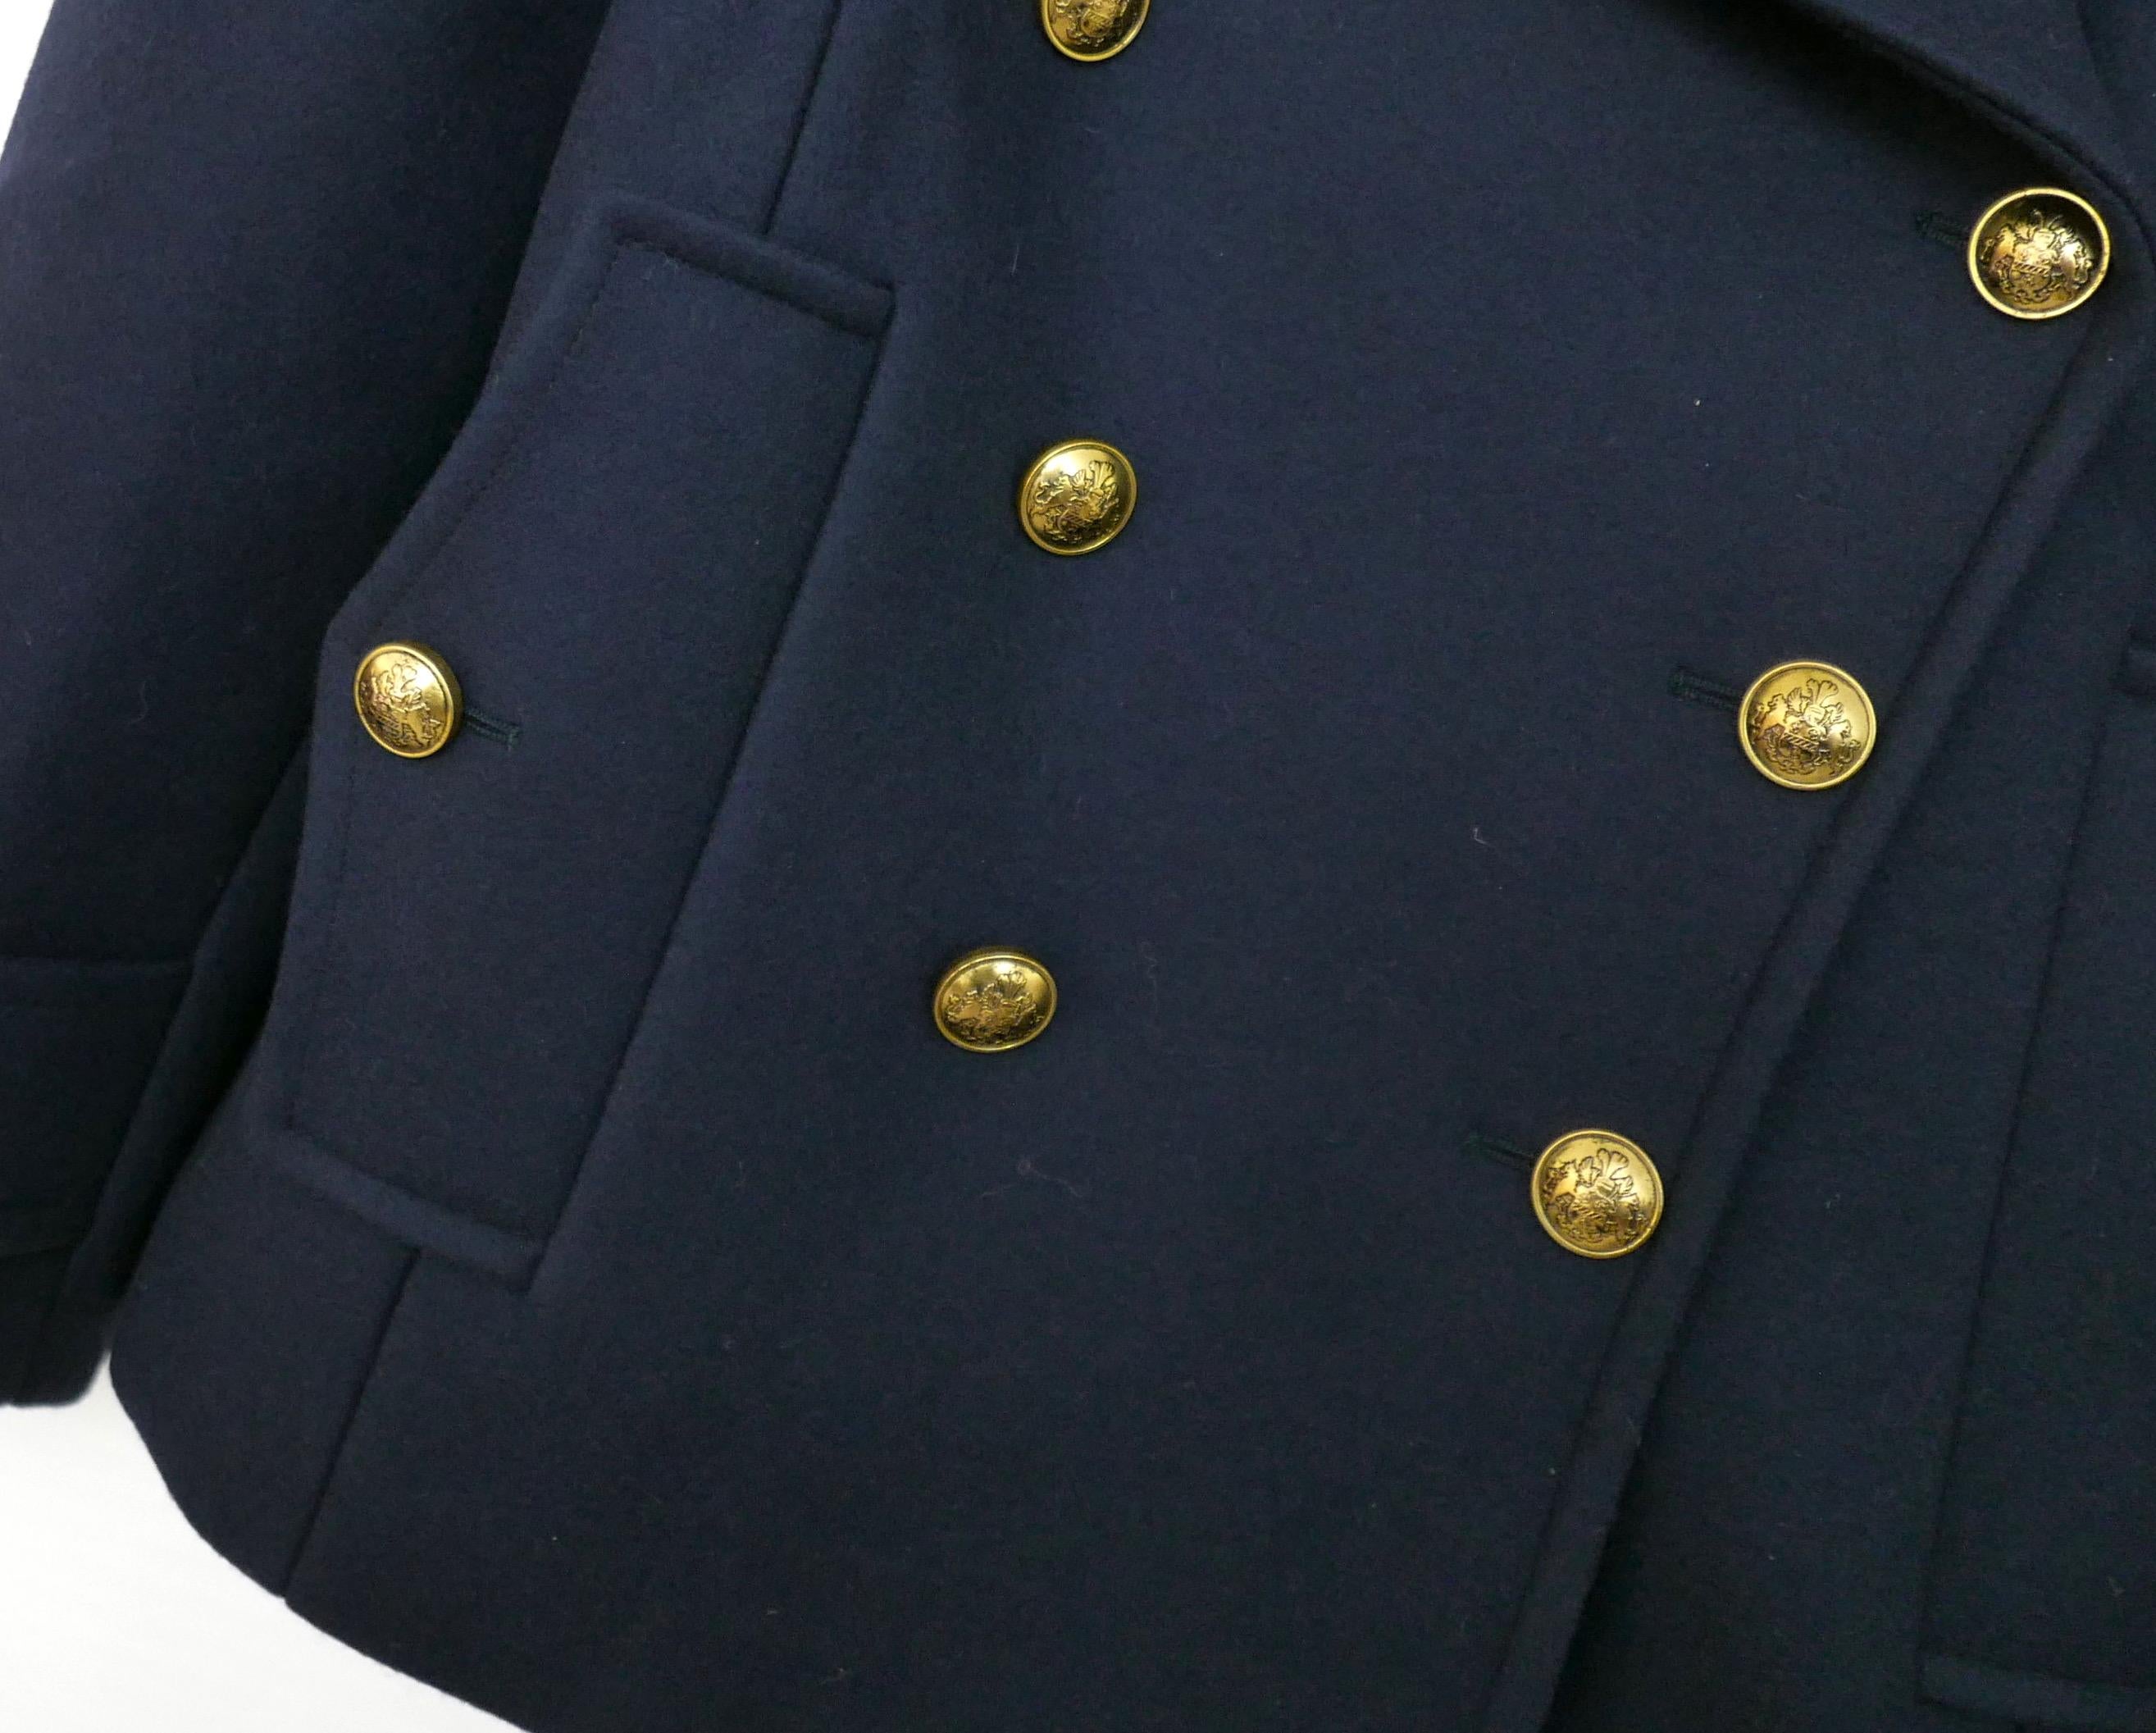 Super luxe classic with a twist pea coat from the Michael Kors Collection AW19 runway - bought for £2500 and new with tags and spare buttons. 

Made from super dense, heavy and smooth navy wool with soft navy satin lining with gold-tone heraldry